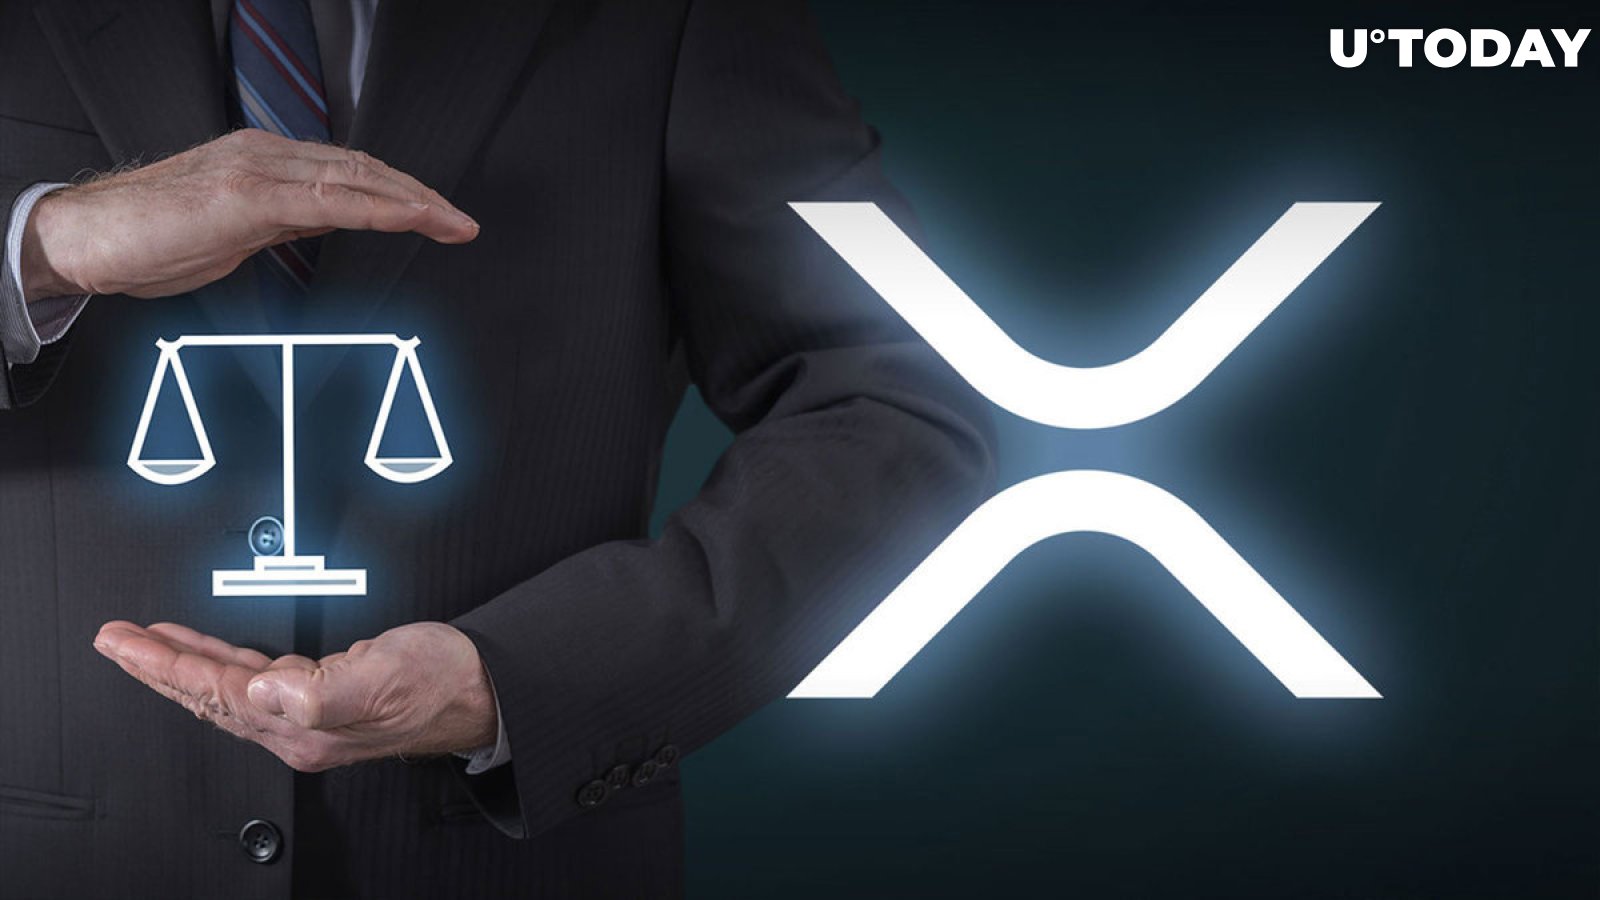 SEC v. Ripple: XRP's Fate to Be Decided by Trial, Crypto Lawyers Agree